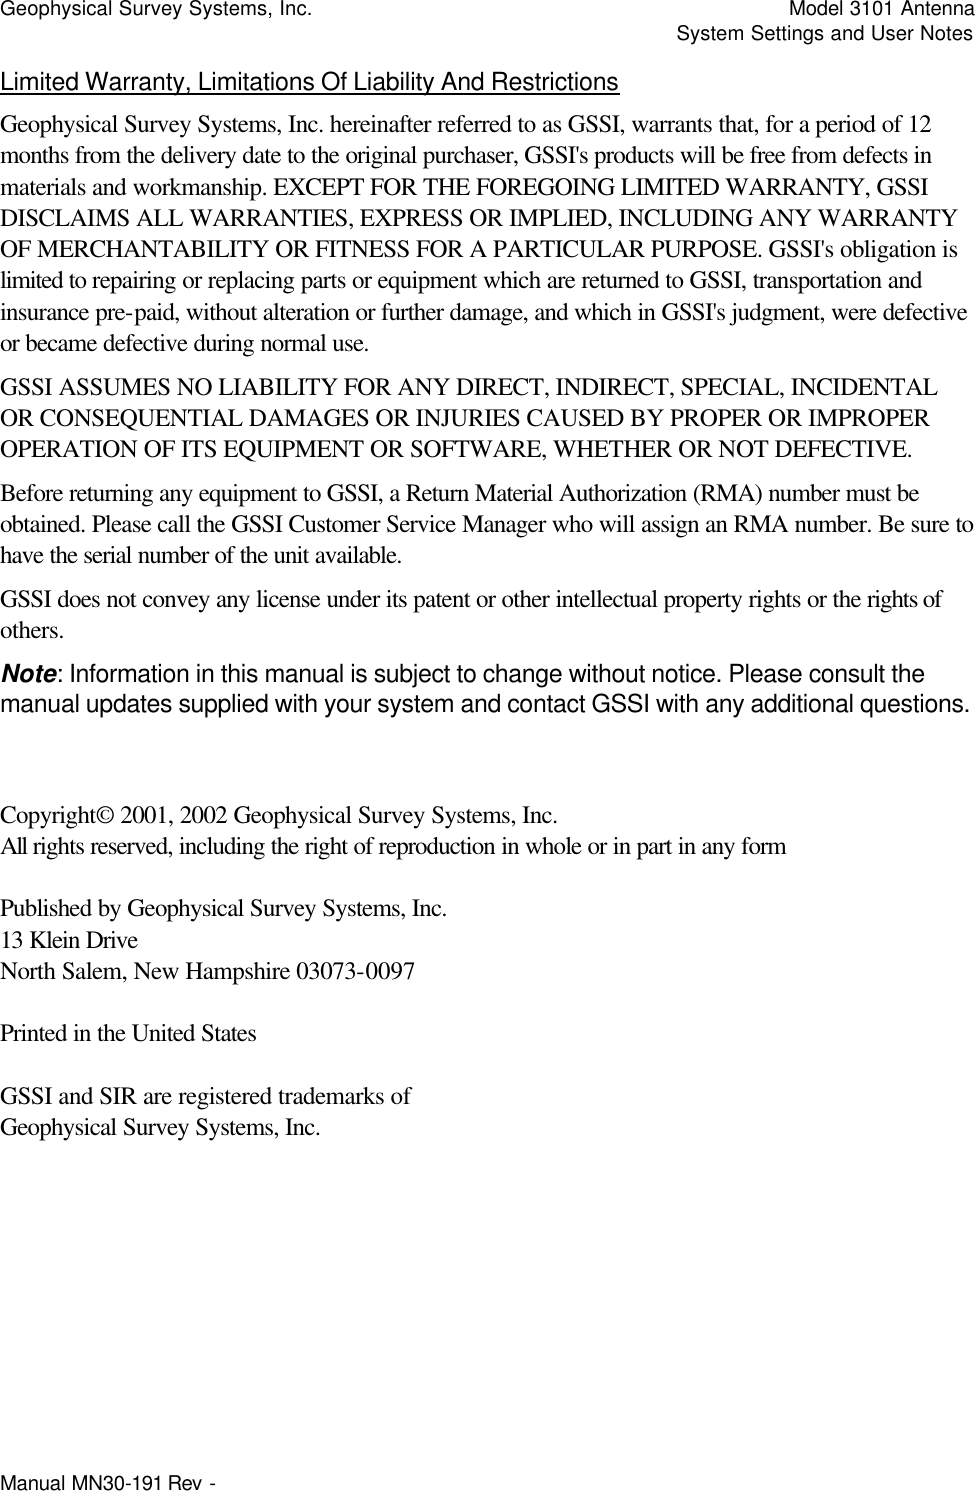 Geophysical Survey Systems, Inc.    Model 3101 Antenna     System Settings and User Notes Manual MN30-191 Rev -   Limited Warranty, Limitations Of Liability And Restrictions Geophysical Survey Systems, Inc. hereinafter referred to as GSSI, warrants that, for a period of 12 months from the delivery date to the original purchaser, GSSI&apos;s products will be free from defects in materials and workmanship. EXCEPT FOR THE FOREGOING LIMITED WARRANTY, GSSI DISCLAIMS ALL WARRANTIES, EXPRESS OR IMPLIED, INCLUDING ANY WARRANTY OF MERCHANTABILITY OR FITNESS FOR A PARTICULAR PURPOSE. GSSI&apos;s obligation is limited to repairing or replacing parts or equipment which are returned to GSSI, transportation and insurance pre-paid, without alteration or further damage, and which in GSSI&apos;s judgment, were defective or became defective during normal use. GSSI ASSUMES NO LIABILITY FOR ANY DIRECT, INDIRECT, SPECIAL, INCIDENTAL OR CONSEQUENTIAL DAMAGES OR INJURIES CAUSED BY PROPER OR IMPROPER OPERATION OF ITS EQUIPMENT OR SOFTWARE, WHETHER OR NOT DEFECTIVE. Before returning any equipment to GSSI, a Return Material Authorization (RMA) number must be obtained. Please call the GSSI Customer Service Manager who will assign an RMA number. Be sure to have the serial number of the unit available. GSSI does not convey any license under its patent or other intellectual property rights or the rights of others. Note: Information in this manual is subject to change without notice. Please consult the manual updates supplied with your system and contact GSSI with any additional questions.   Copyright© 2001, 2002 Geophysical Survey Systems, Inc. All rights reserved, including the right of reproduction in whole or in part in any form  Published by Geophysical Survey Systems, Inc. 13 Klein Drive North Salem, New Hampshire 03073-0097  Printed in the United States  GSSI and SIR are registered trademarks of Geophysical Survey Systems, Inc. 